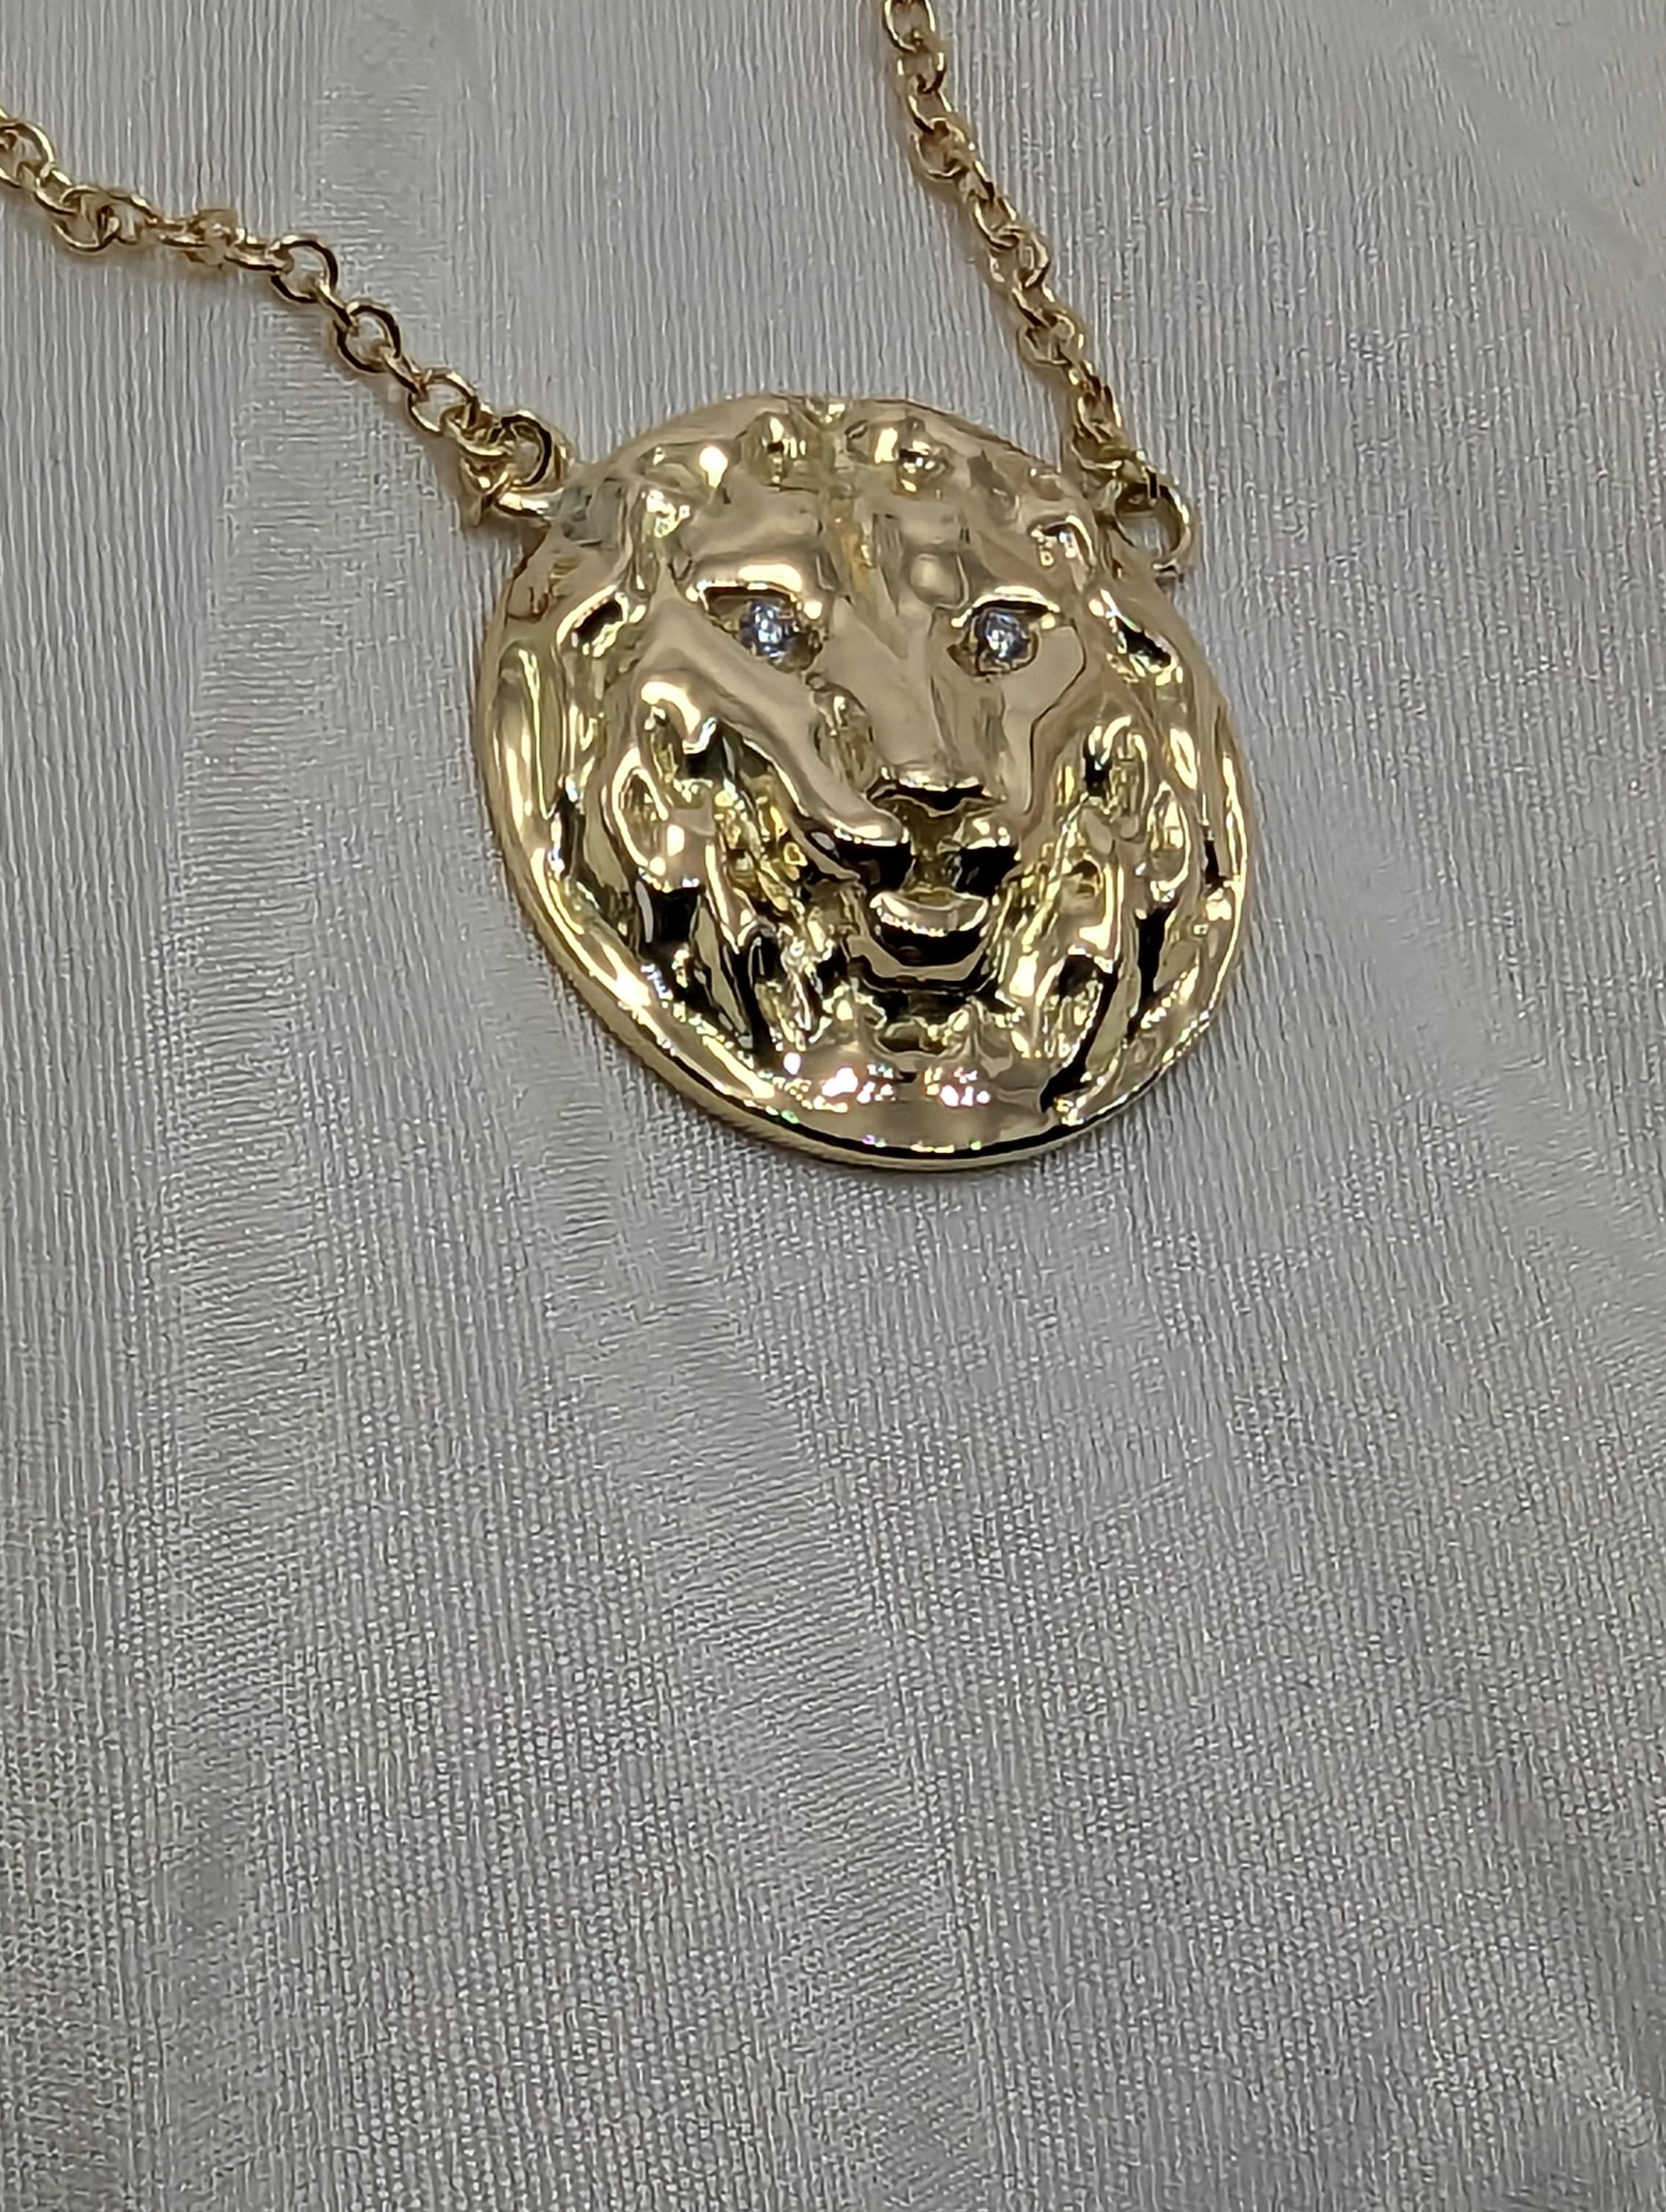 Tiffany Designer, Thomas Kurilla created 18 Karat Yellow Gold GIA Diamond Lion Pendant, 
The king of the jungle. Fearless, territorial, and fighters. Symbolic for many reasons. Now you can get your own and not even bother feeding it! Let it feed